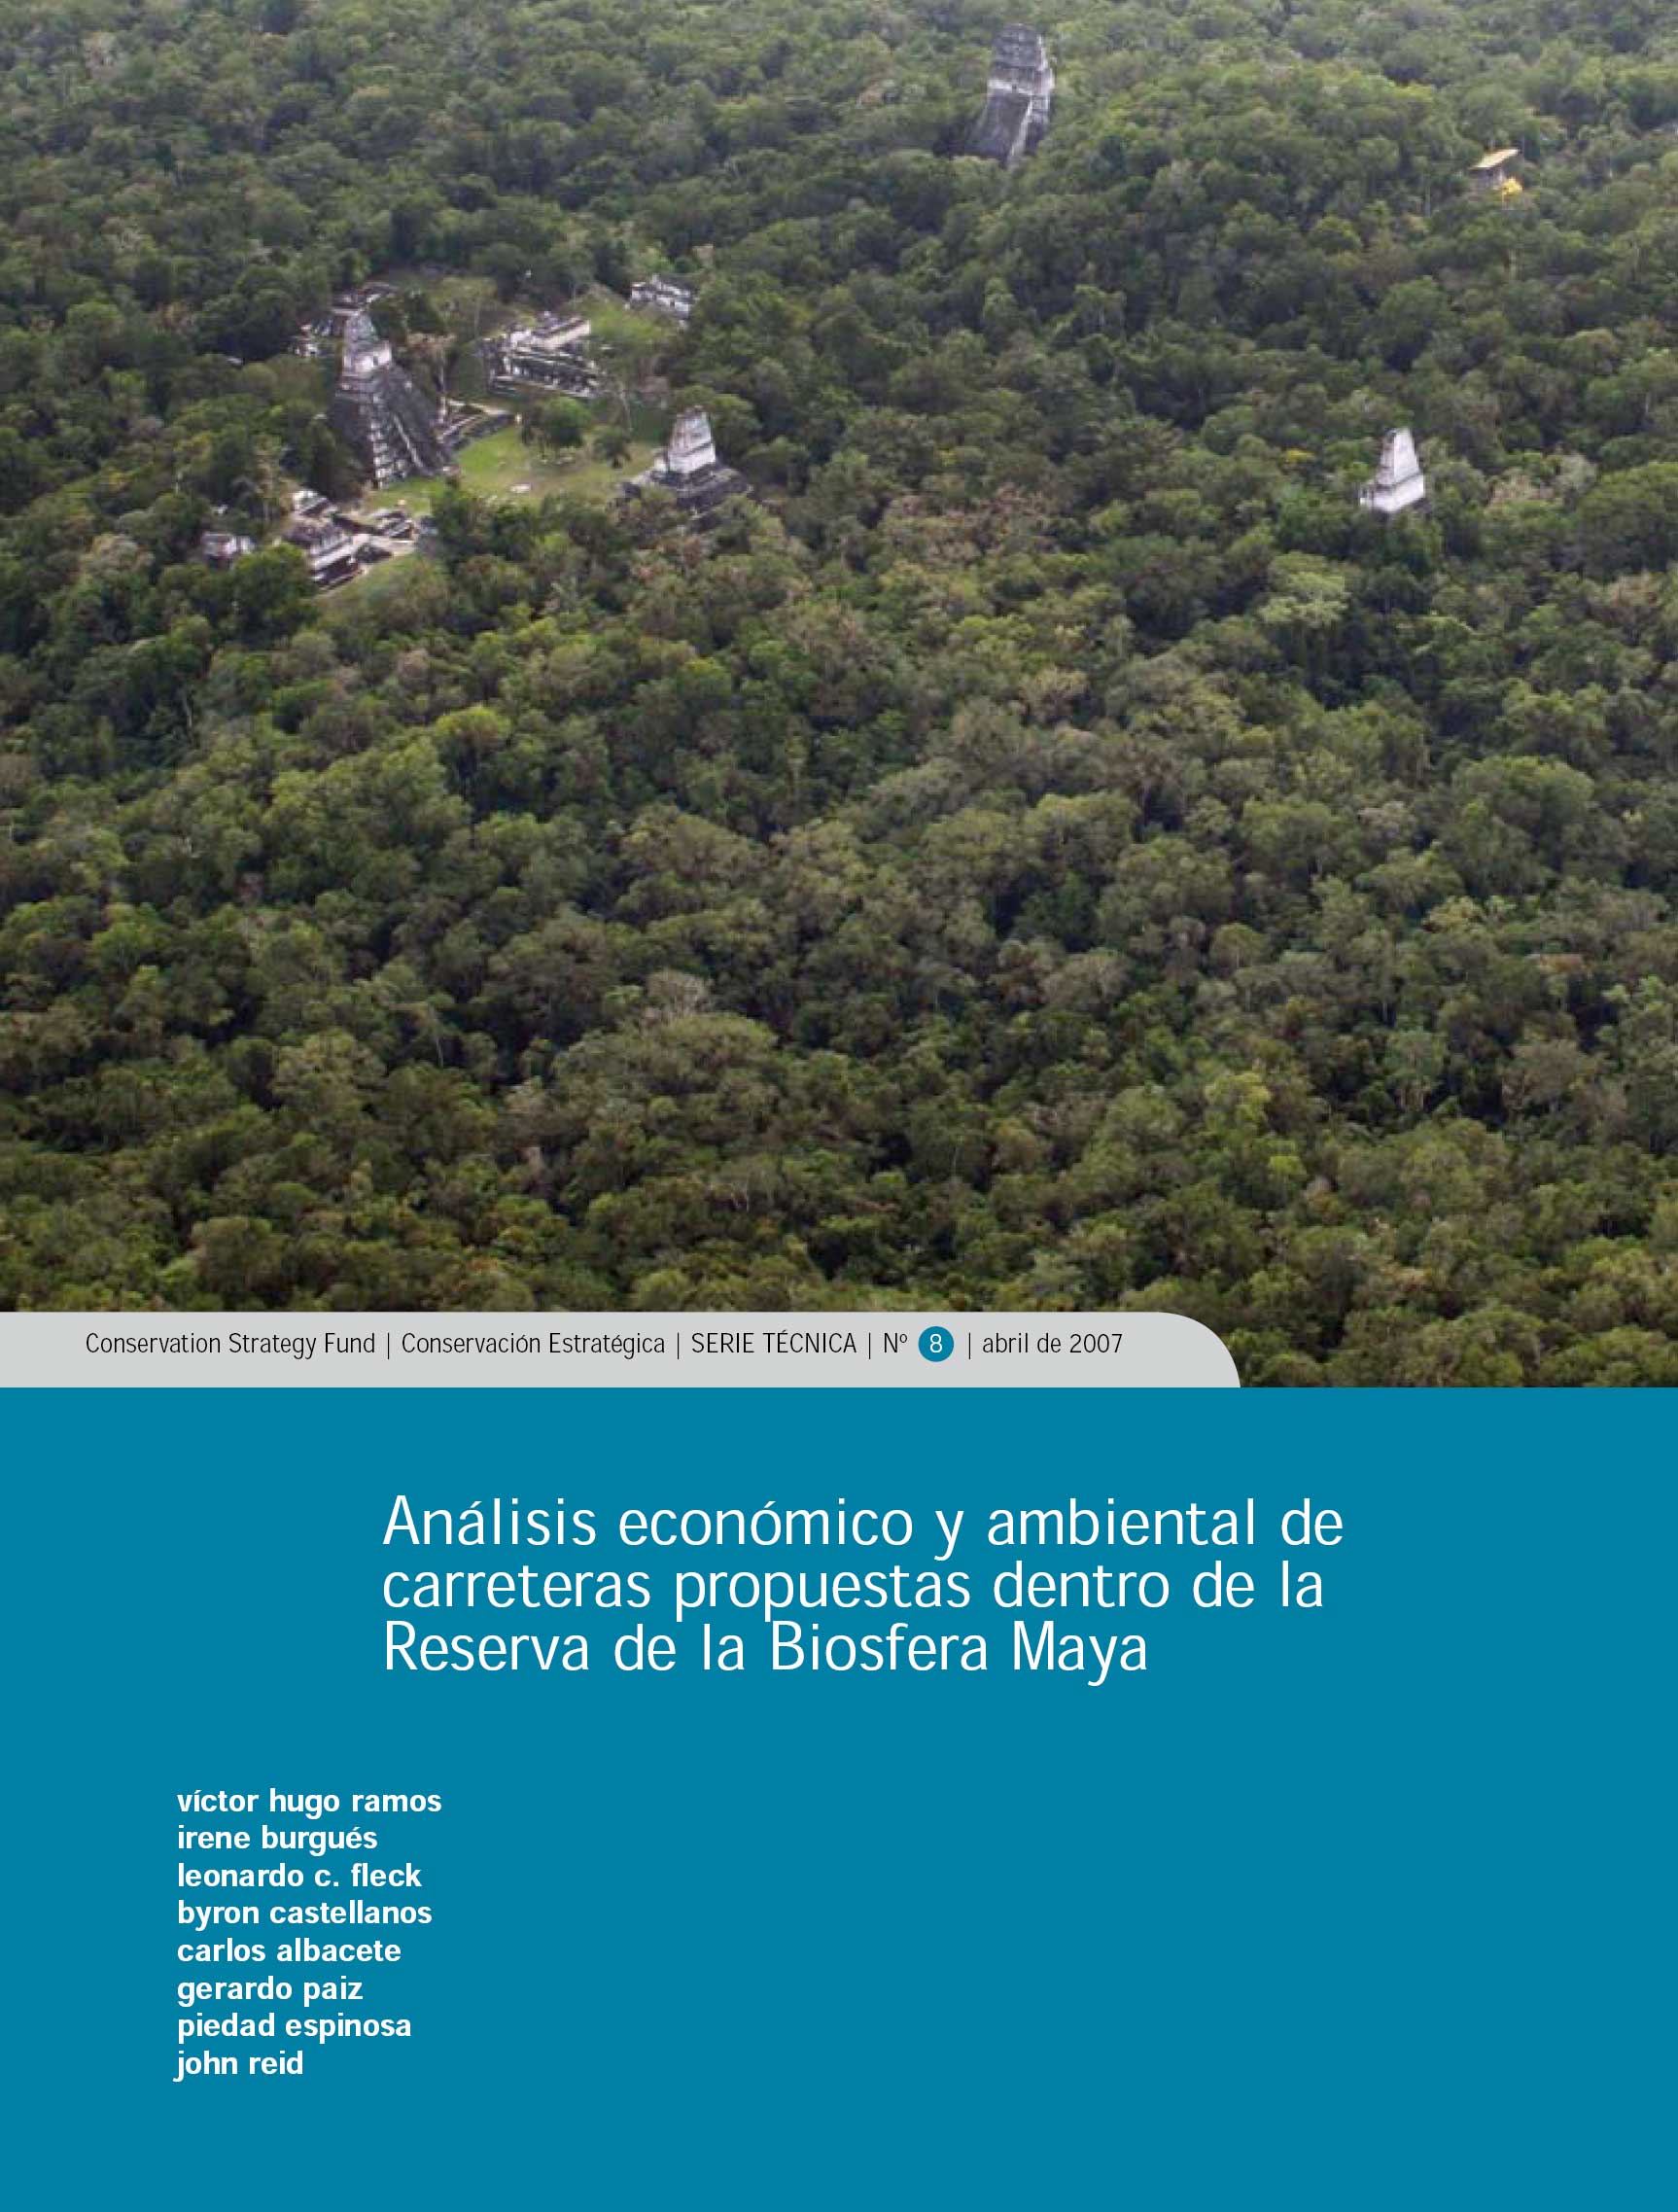 Front cover of report with aerial photo of forest and Mayan ruins